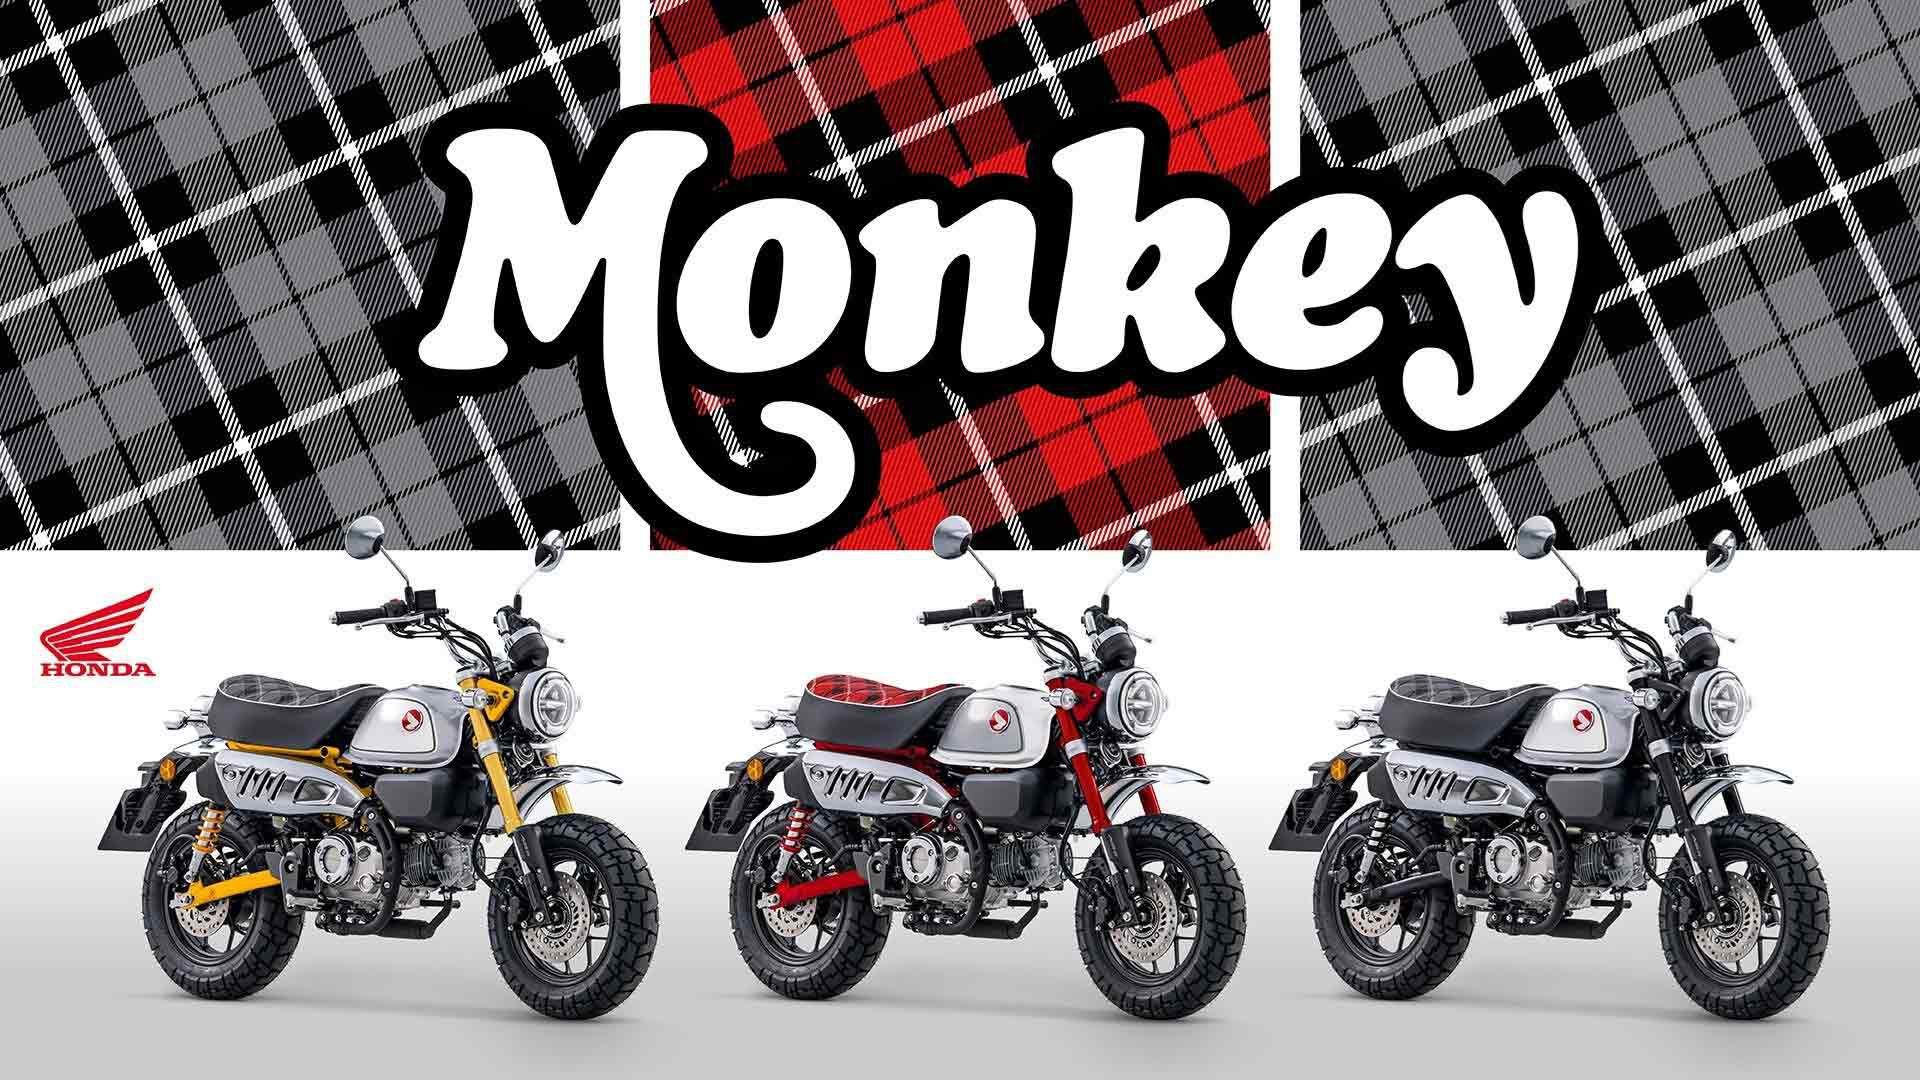 Gotta love the Honda marketing for these new bikes. | Tartan or plaid: What’s the difference?